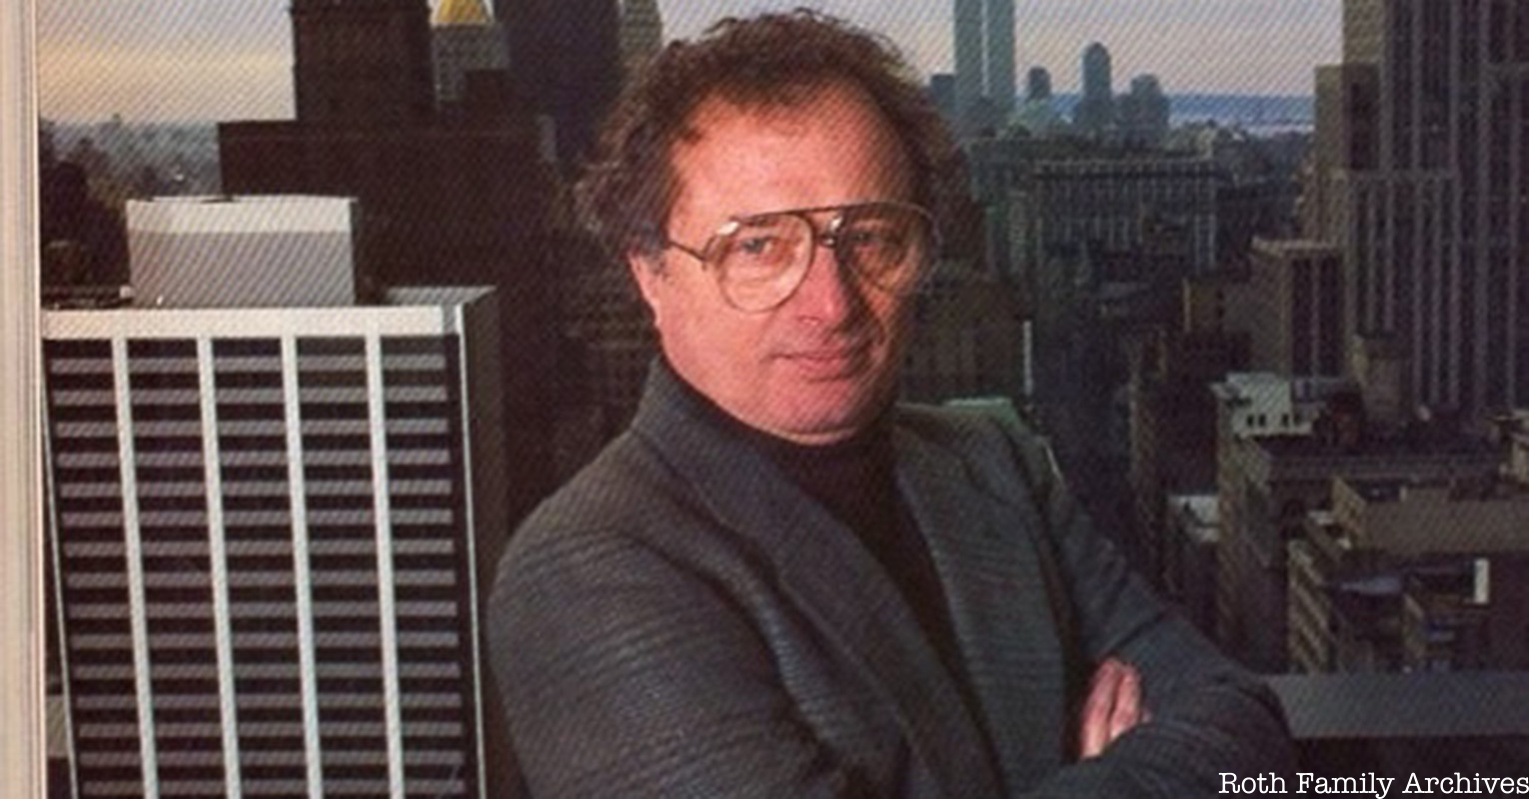 Richard Roth Jr. stands in front of a background of the NYC skyline